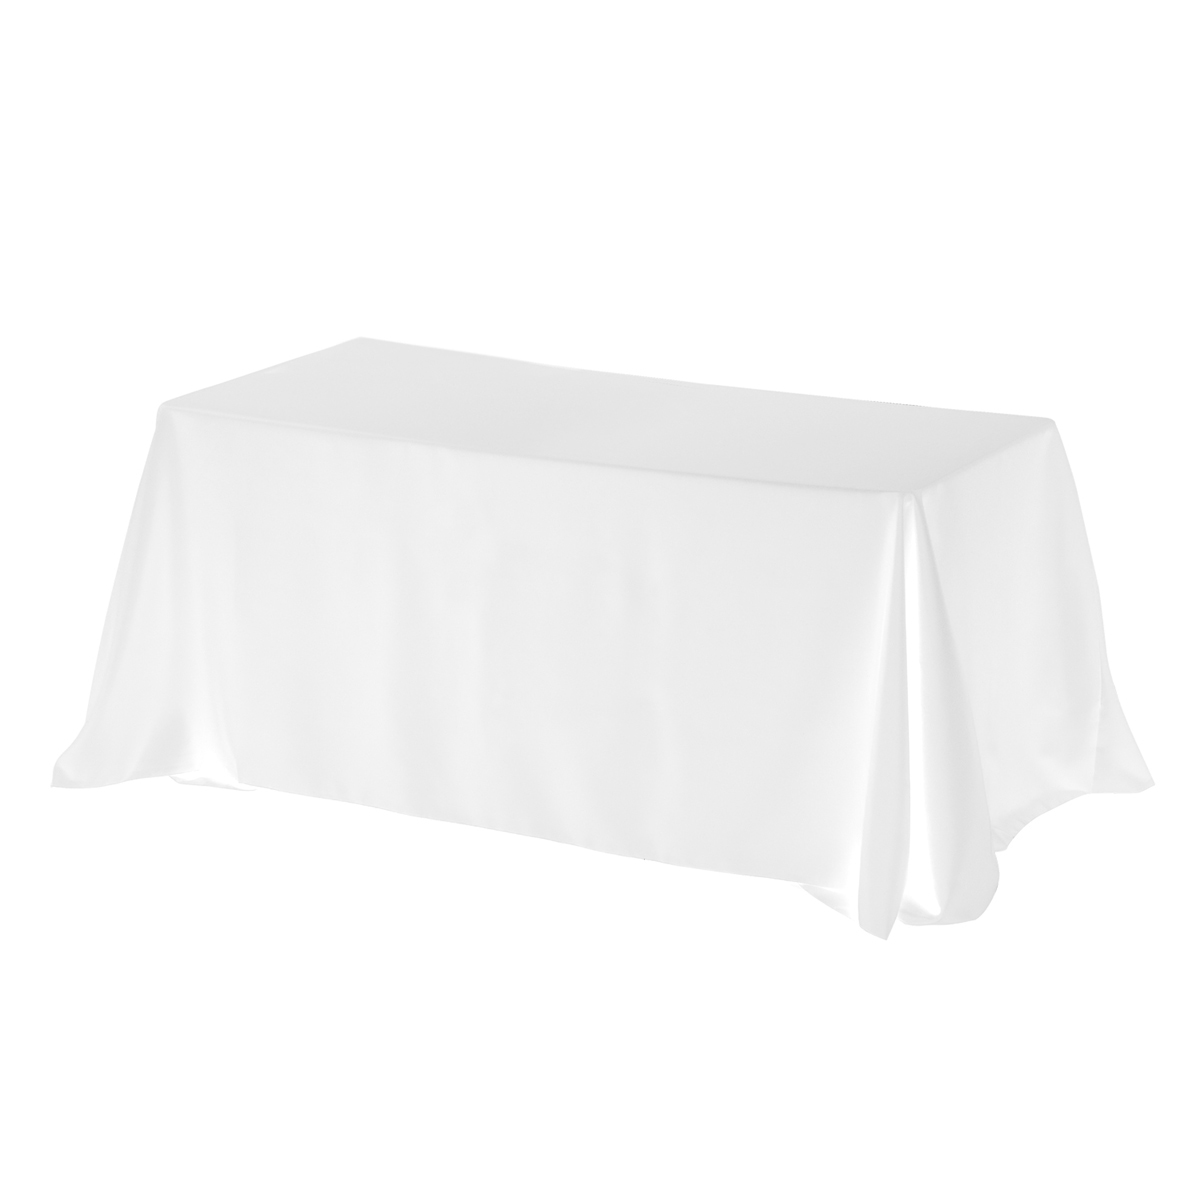 "ZENYATTA EIGHT" 8 ft 4-Sided Throw Style Table Covers & Table Throws -Blanks / Fits 8 ft Table